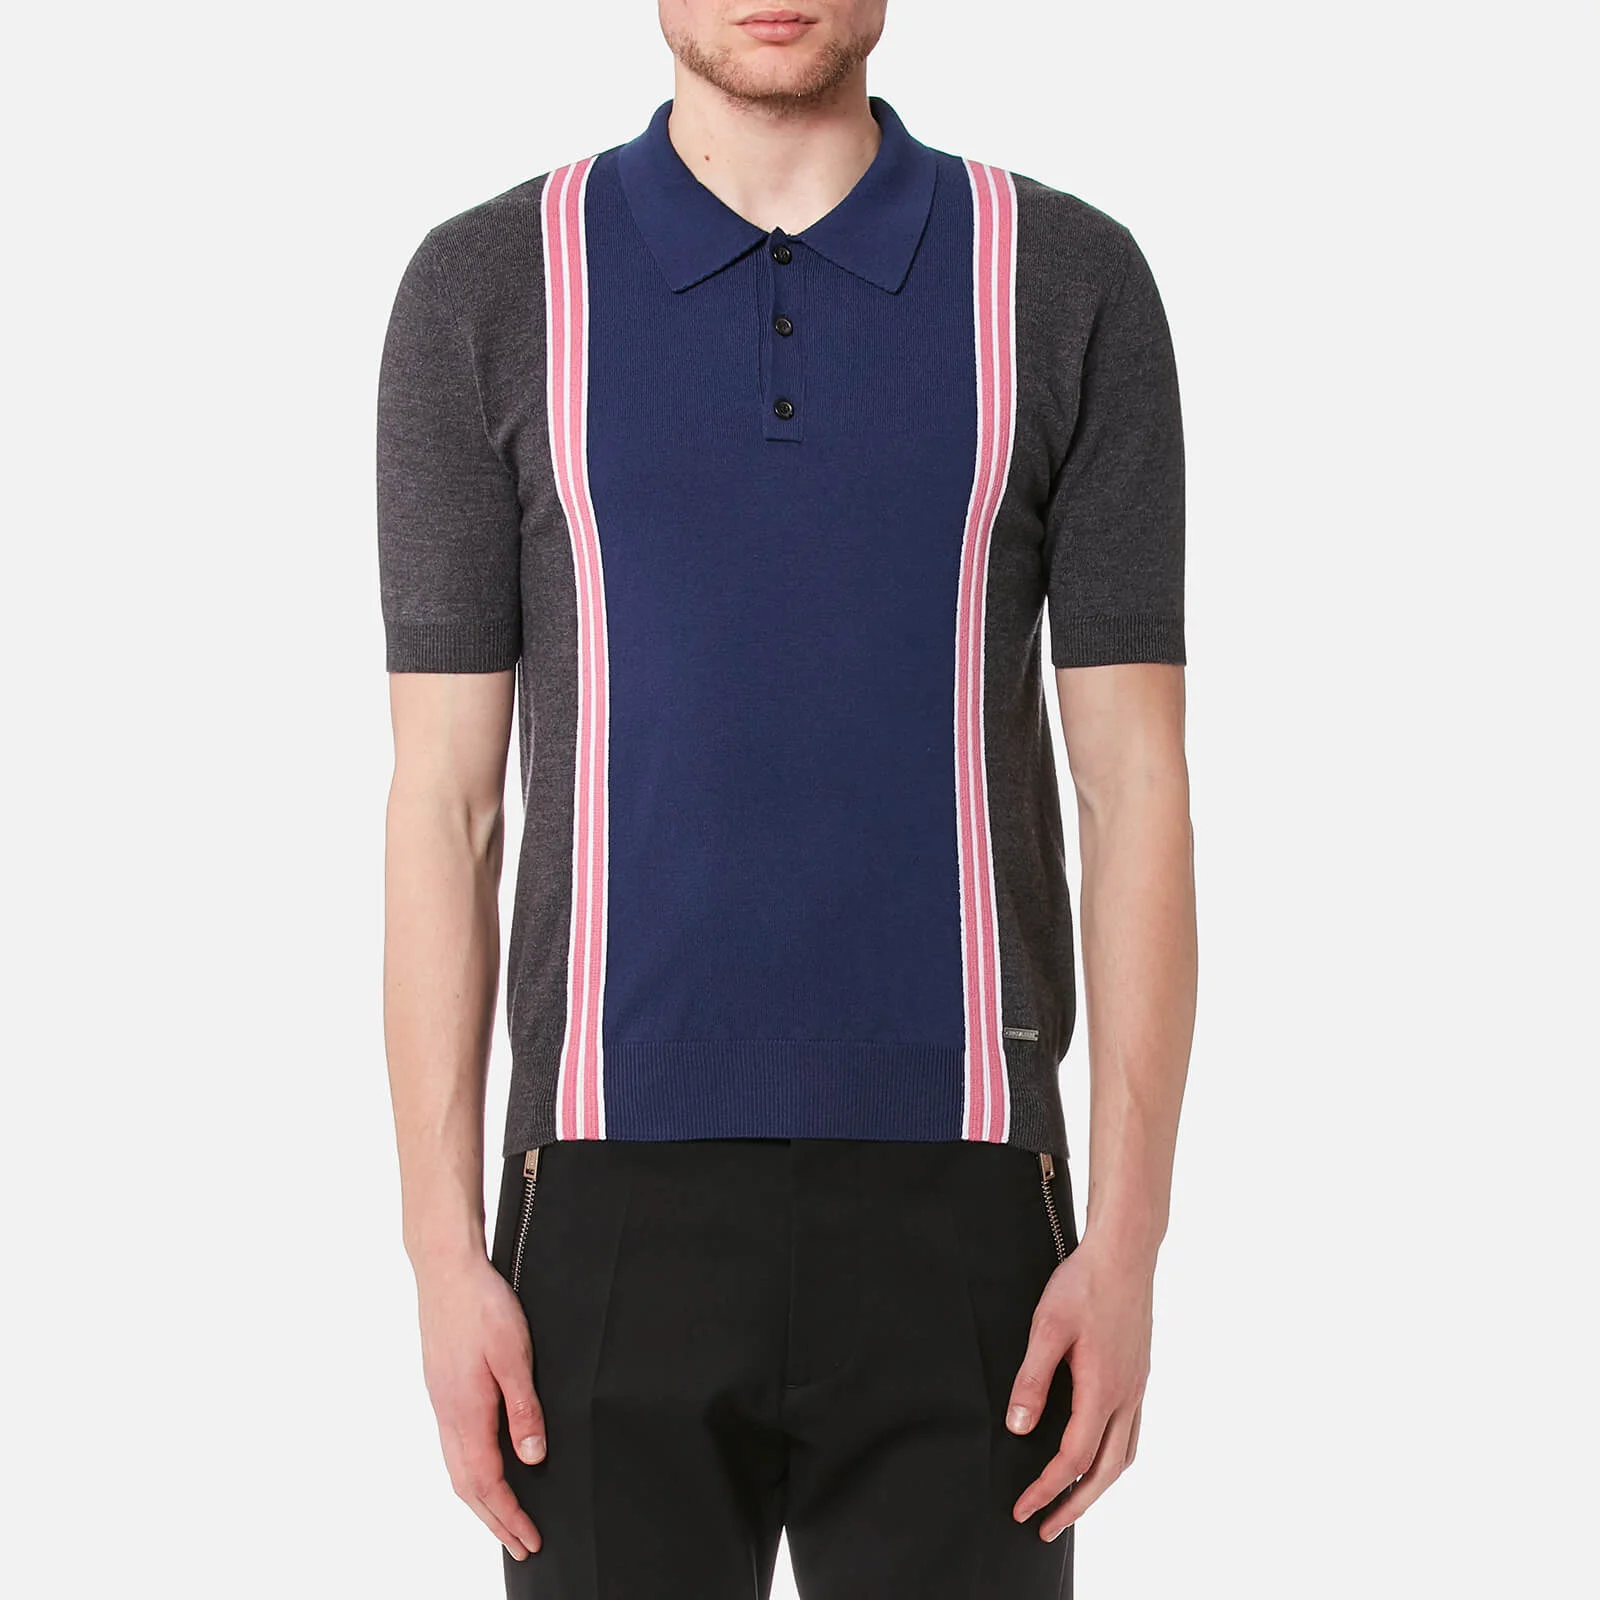 Dsquared2 Men's 3 Button Striped Knitted Polo Shirt - Grey/White/Pink Image 1